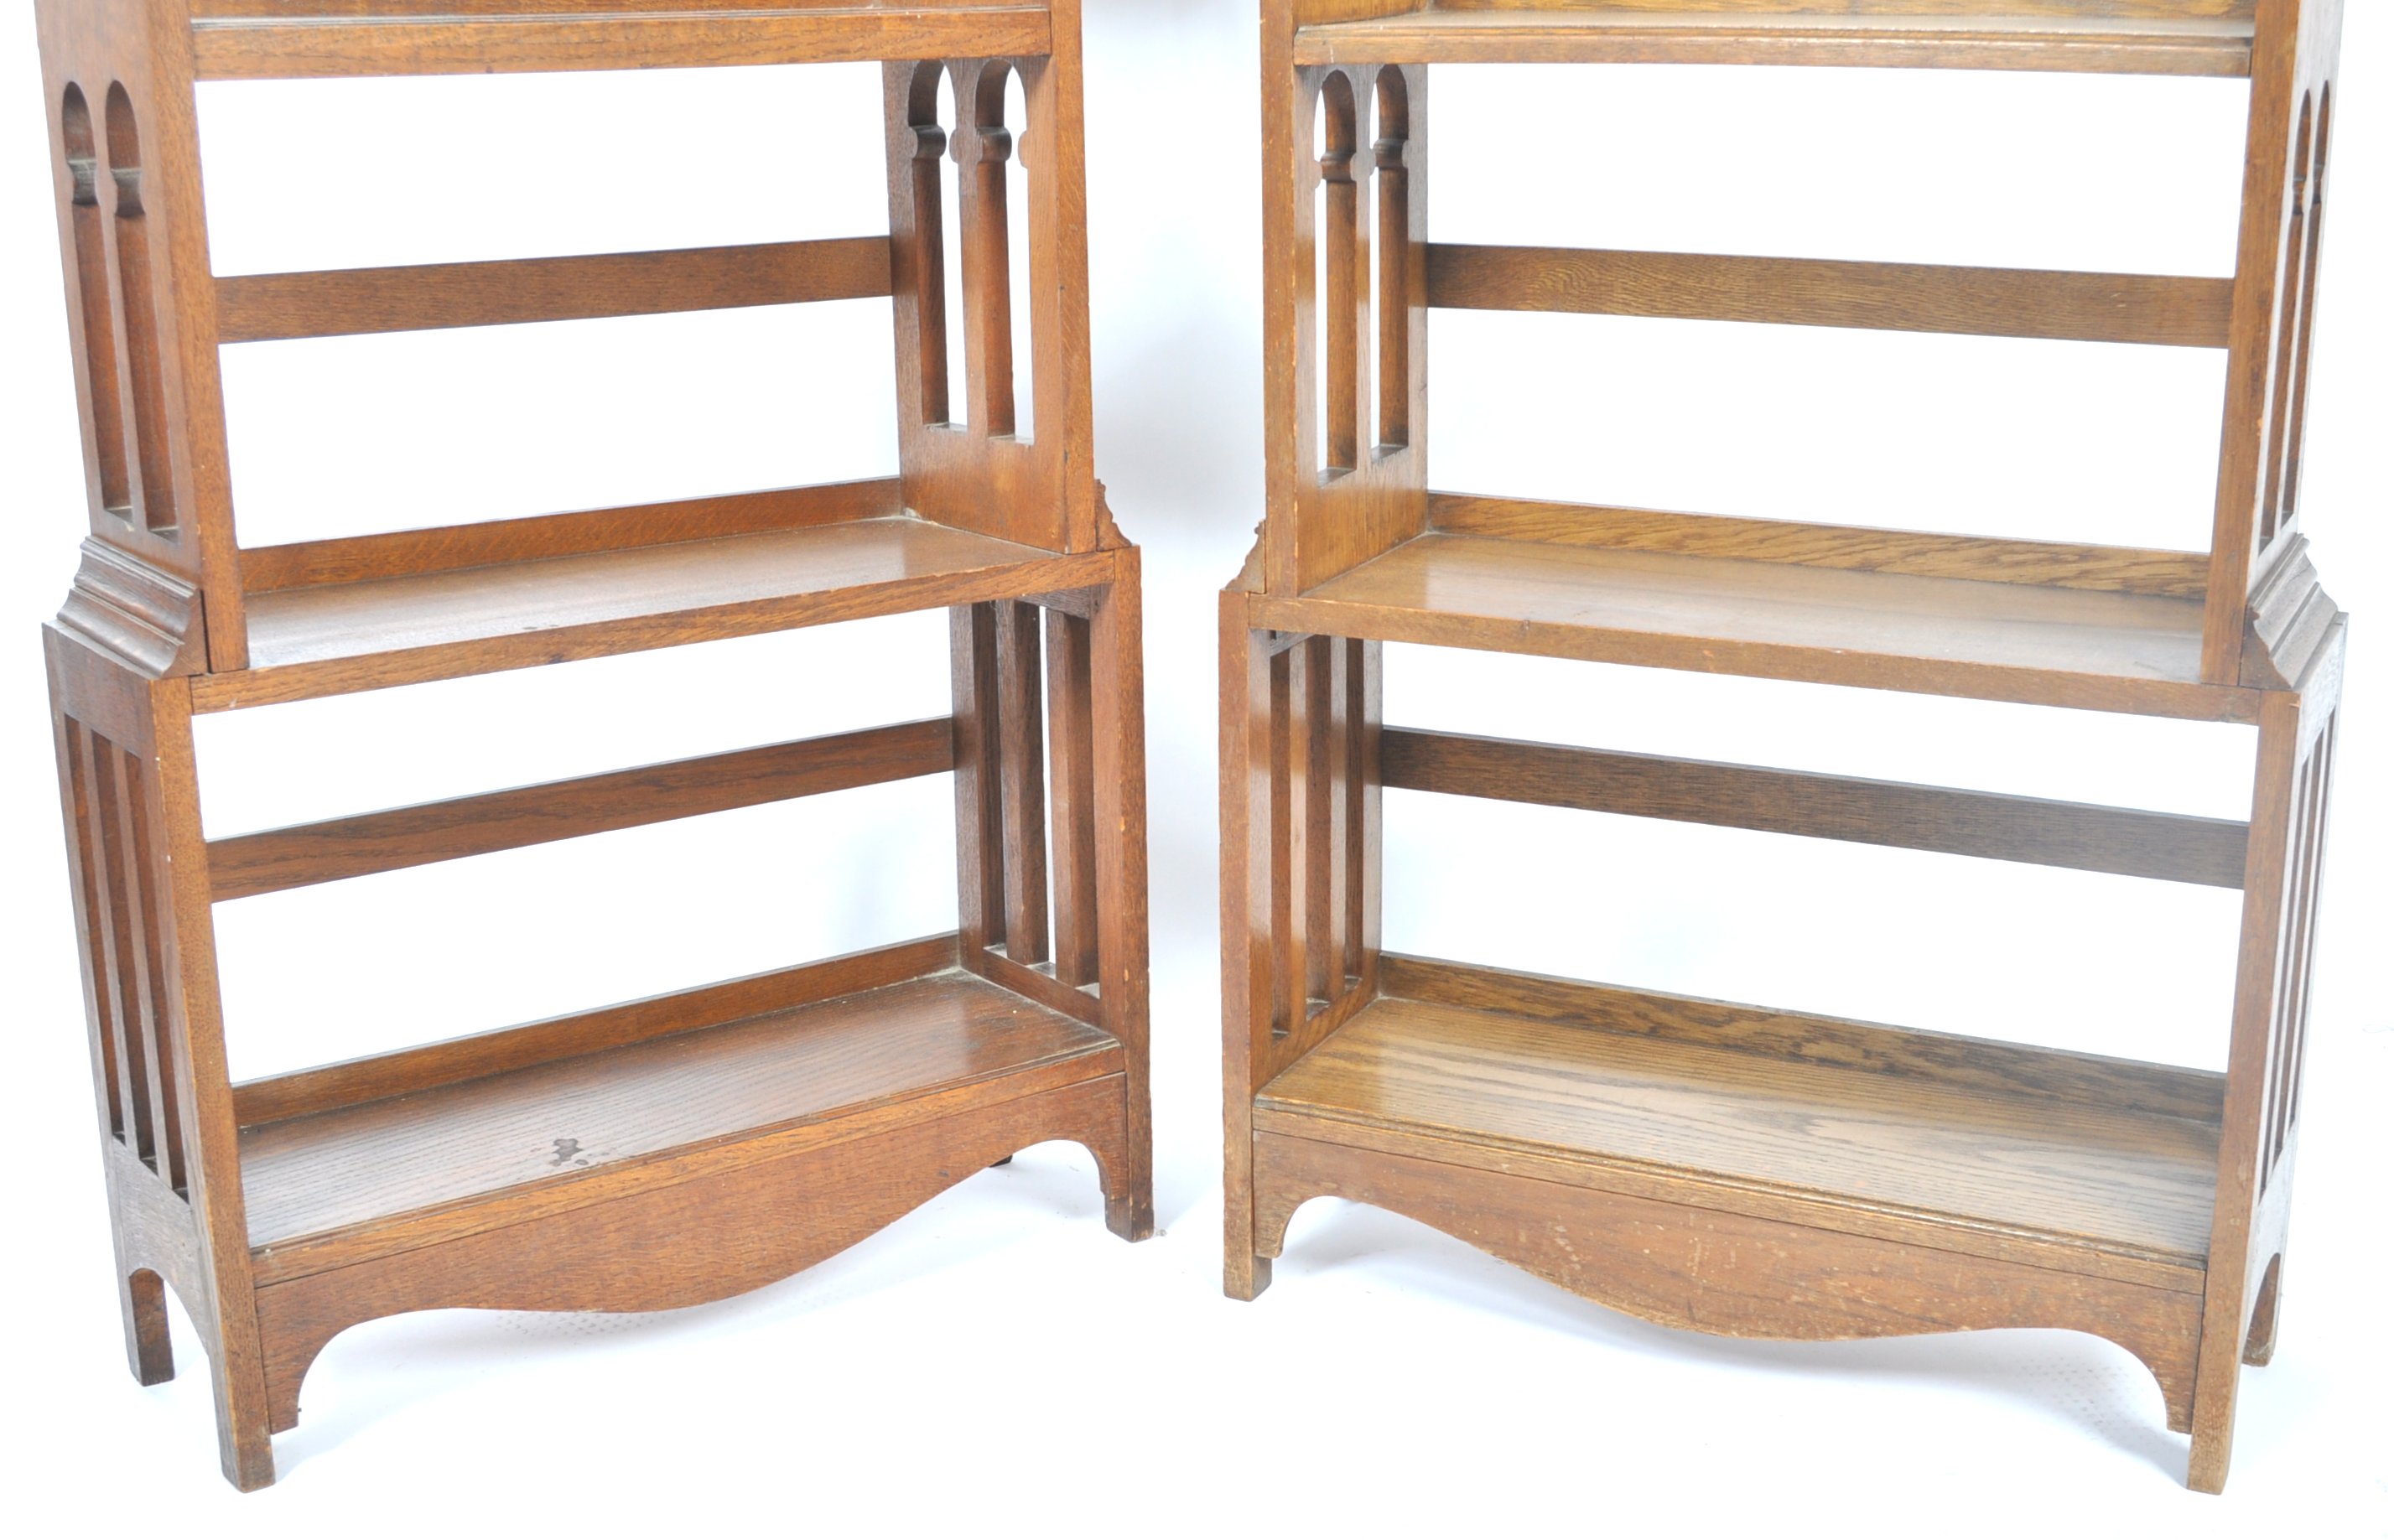 PAIR OF EARLY 20TH CENTURY LIBERTY MANNER BOOKCASES - Image 3 of 8